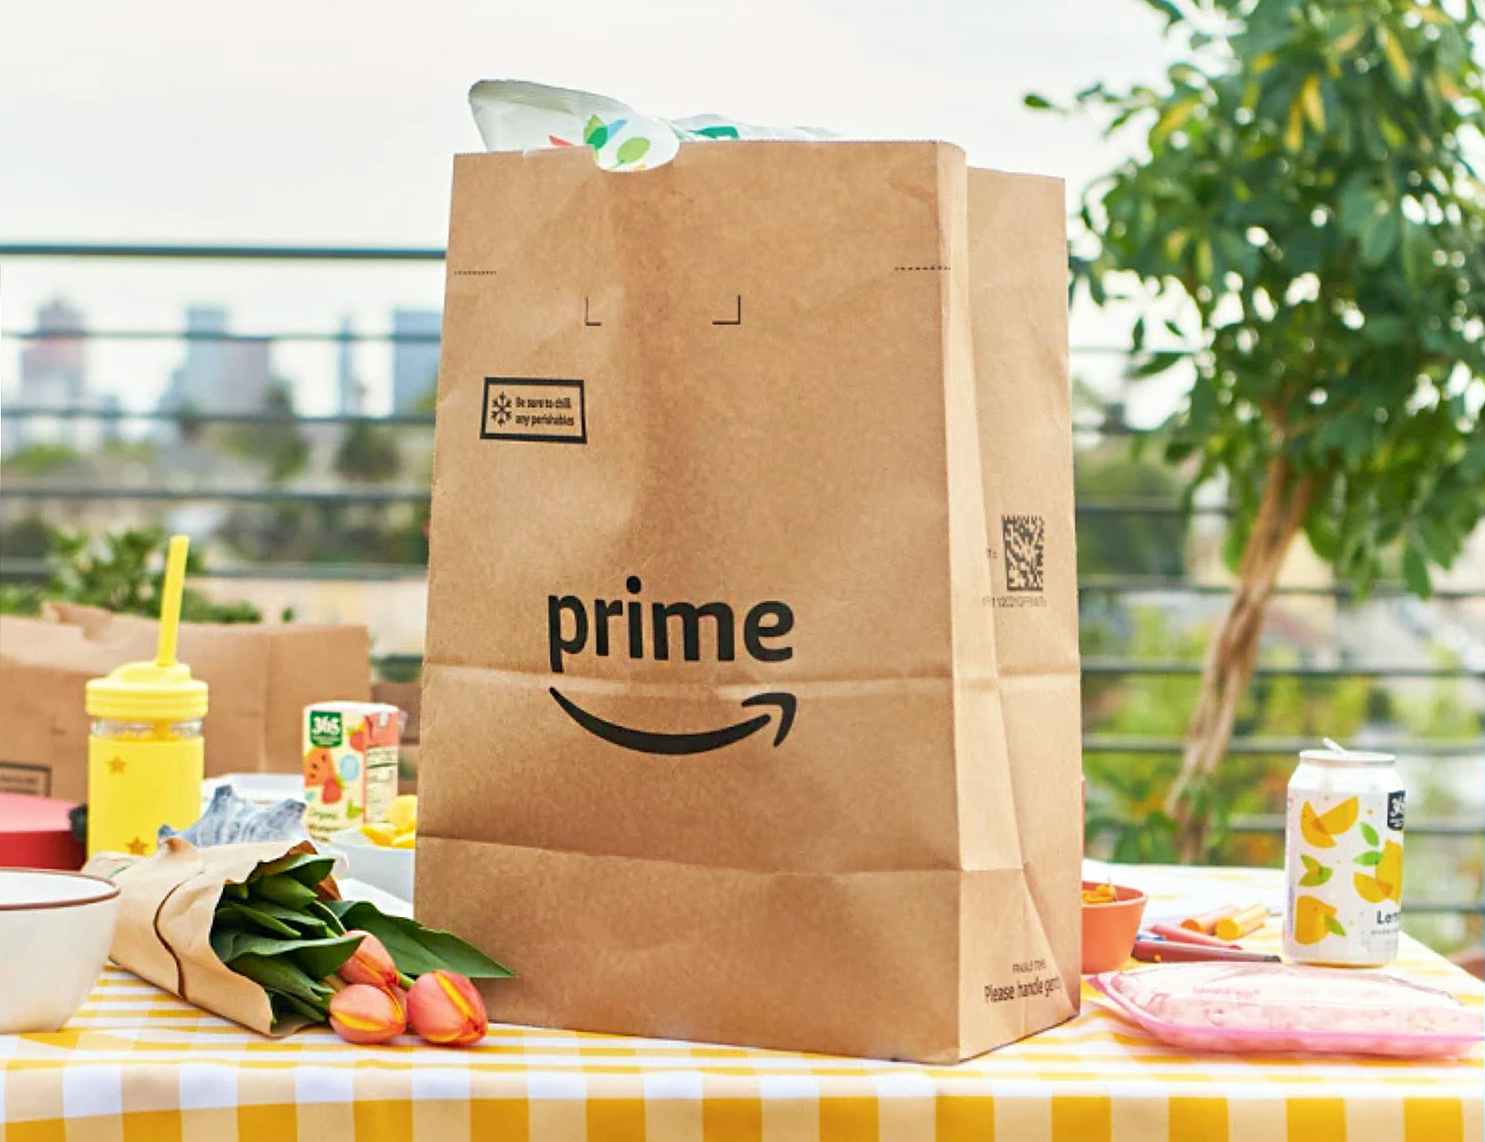 amazon prime bag on picnic table with flowers